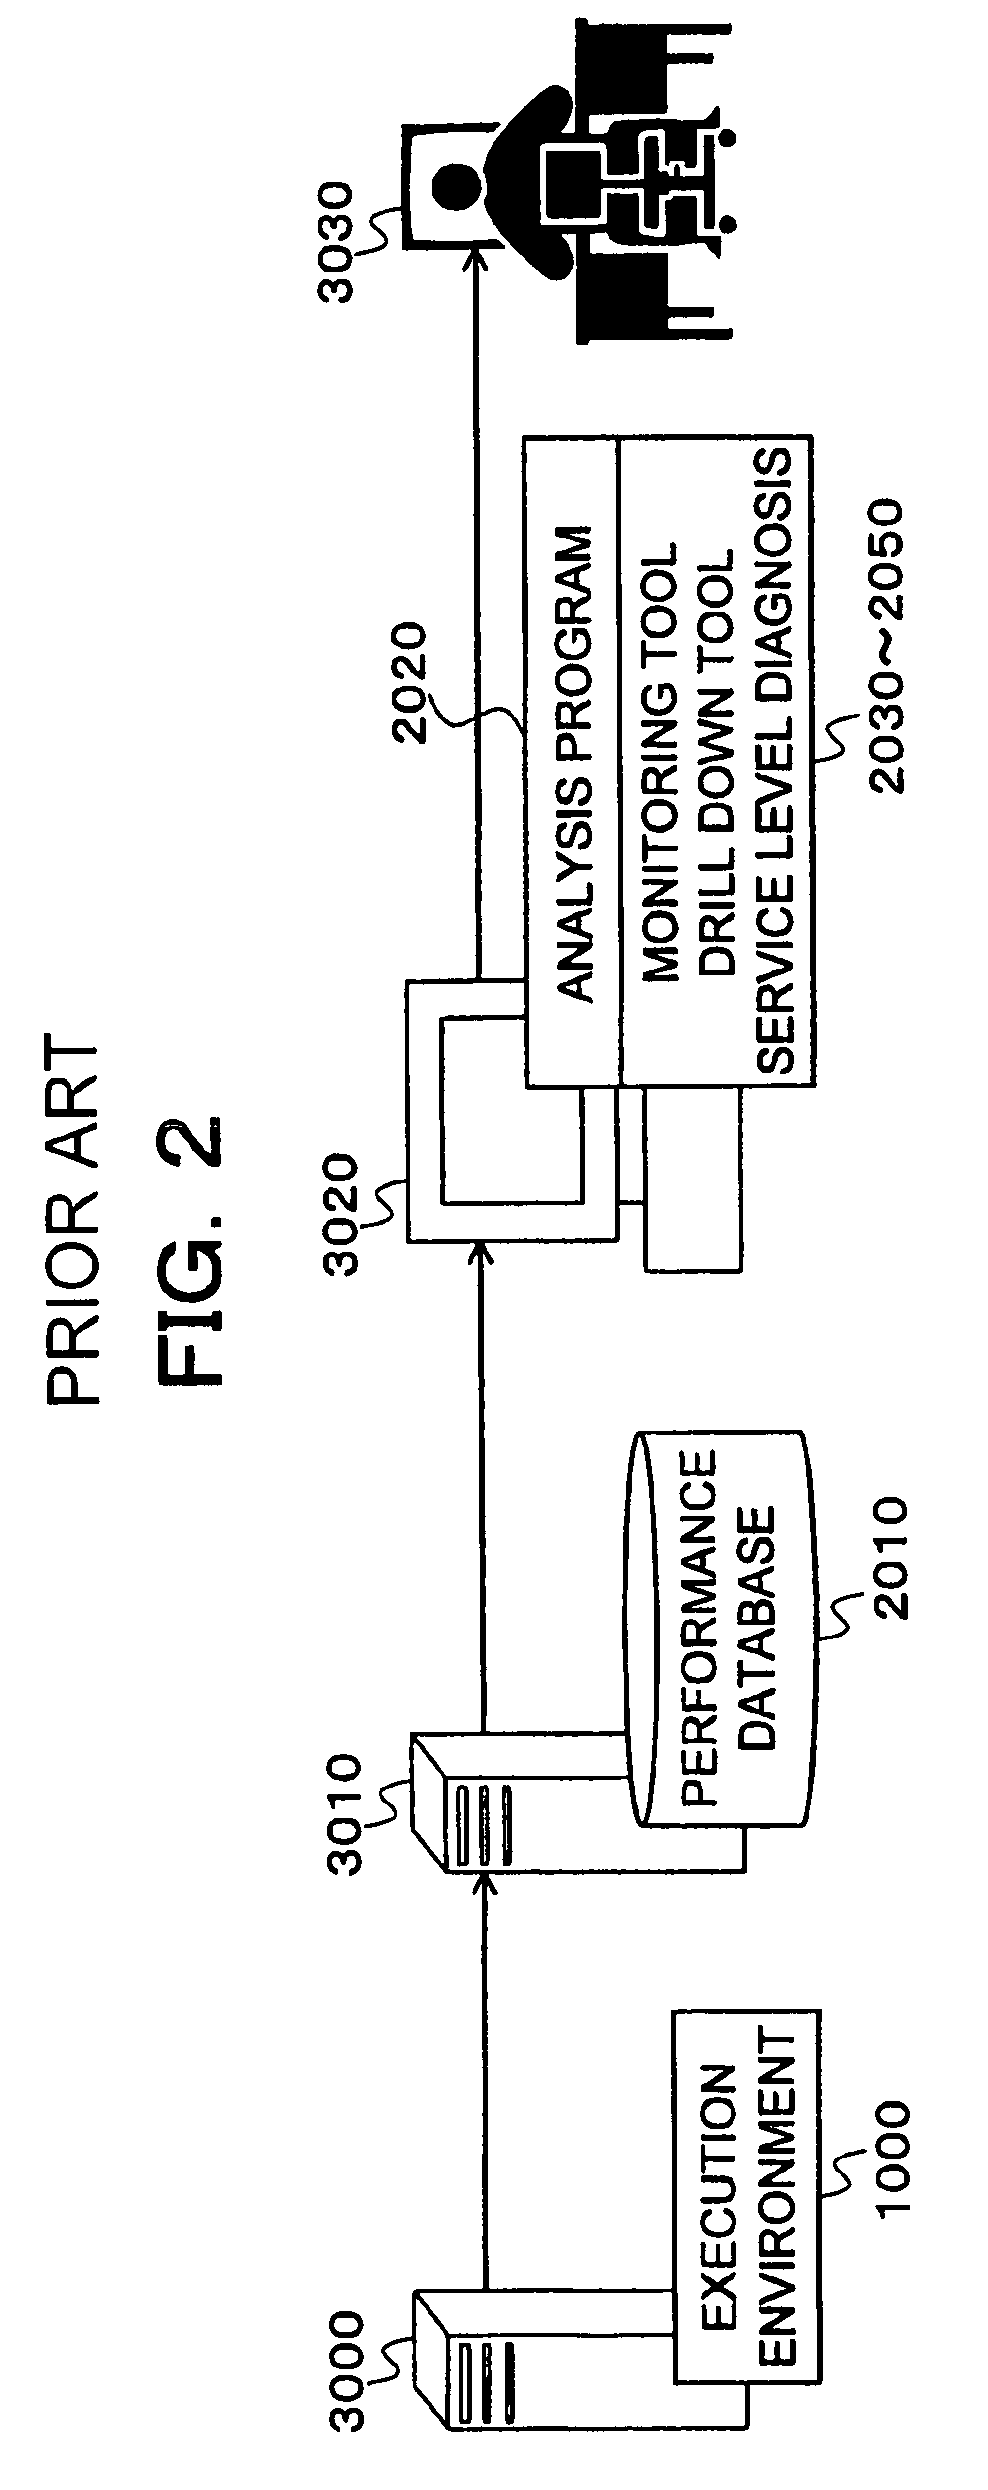 Method for predicting and avoiding danger in execution environment